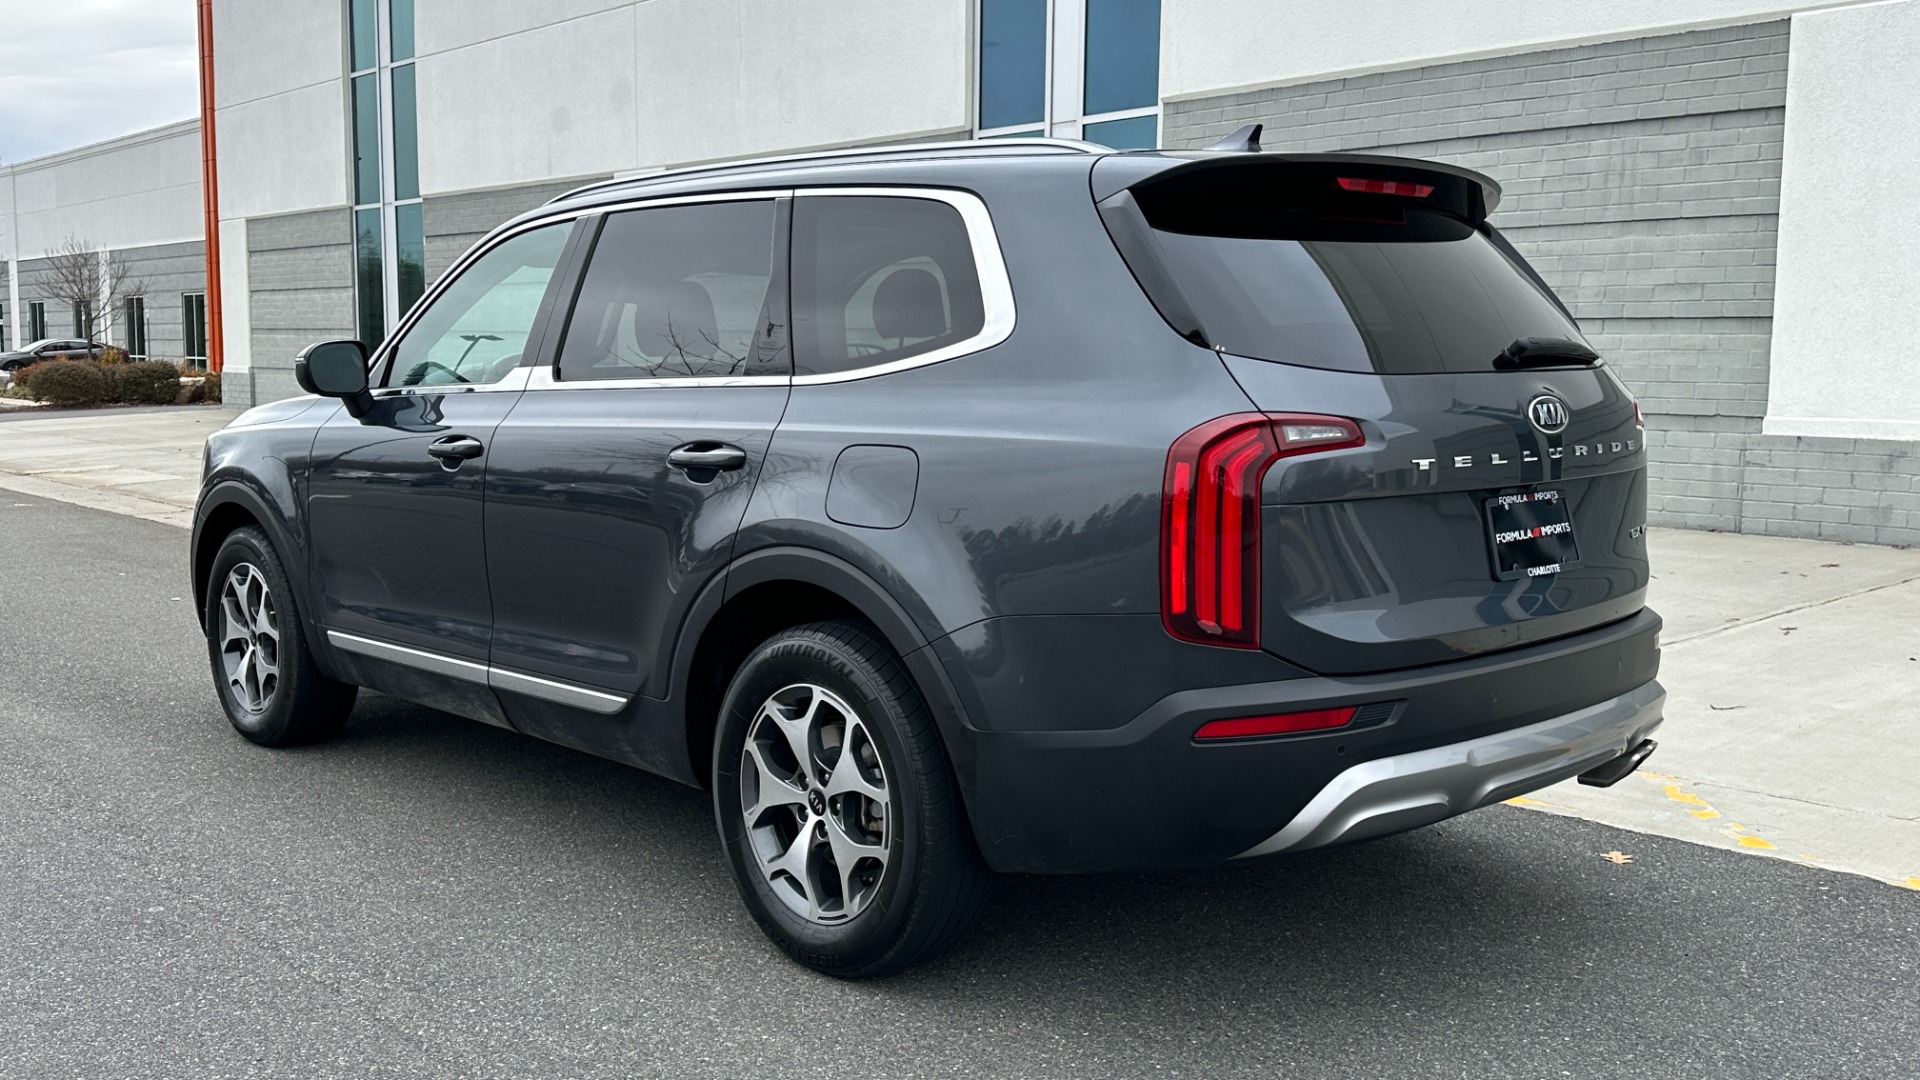 Used 2020 Kia Telluride EX / DRIVER ASSIST / LEATHER / V6 / APPLE CARPLAY / REARVIEW / 3 ROW for sale Sold at Formula Imports in Charlotte NC 28227 4